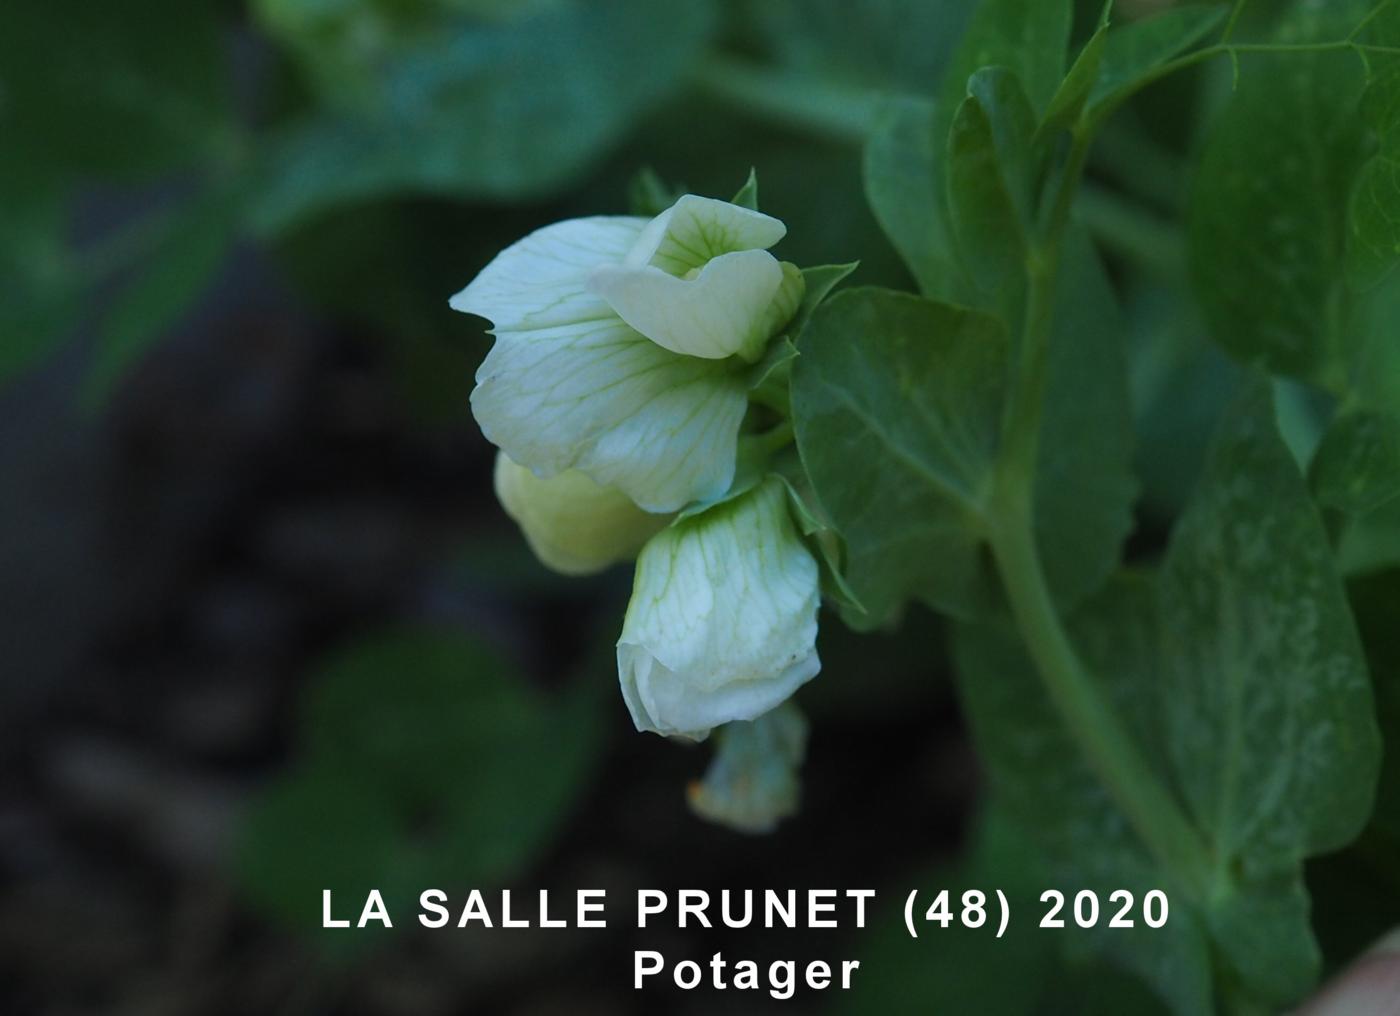 Pea, Cultivated flower